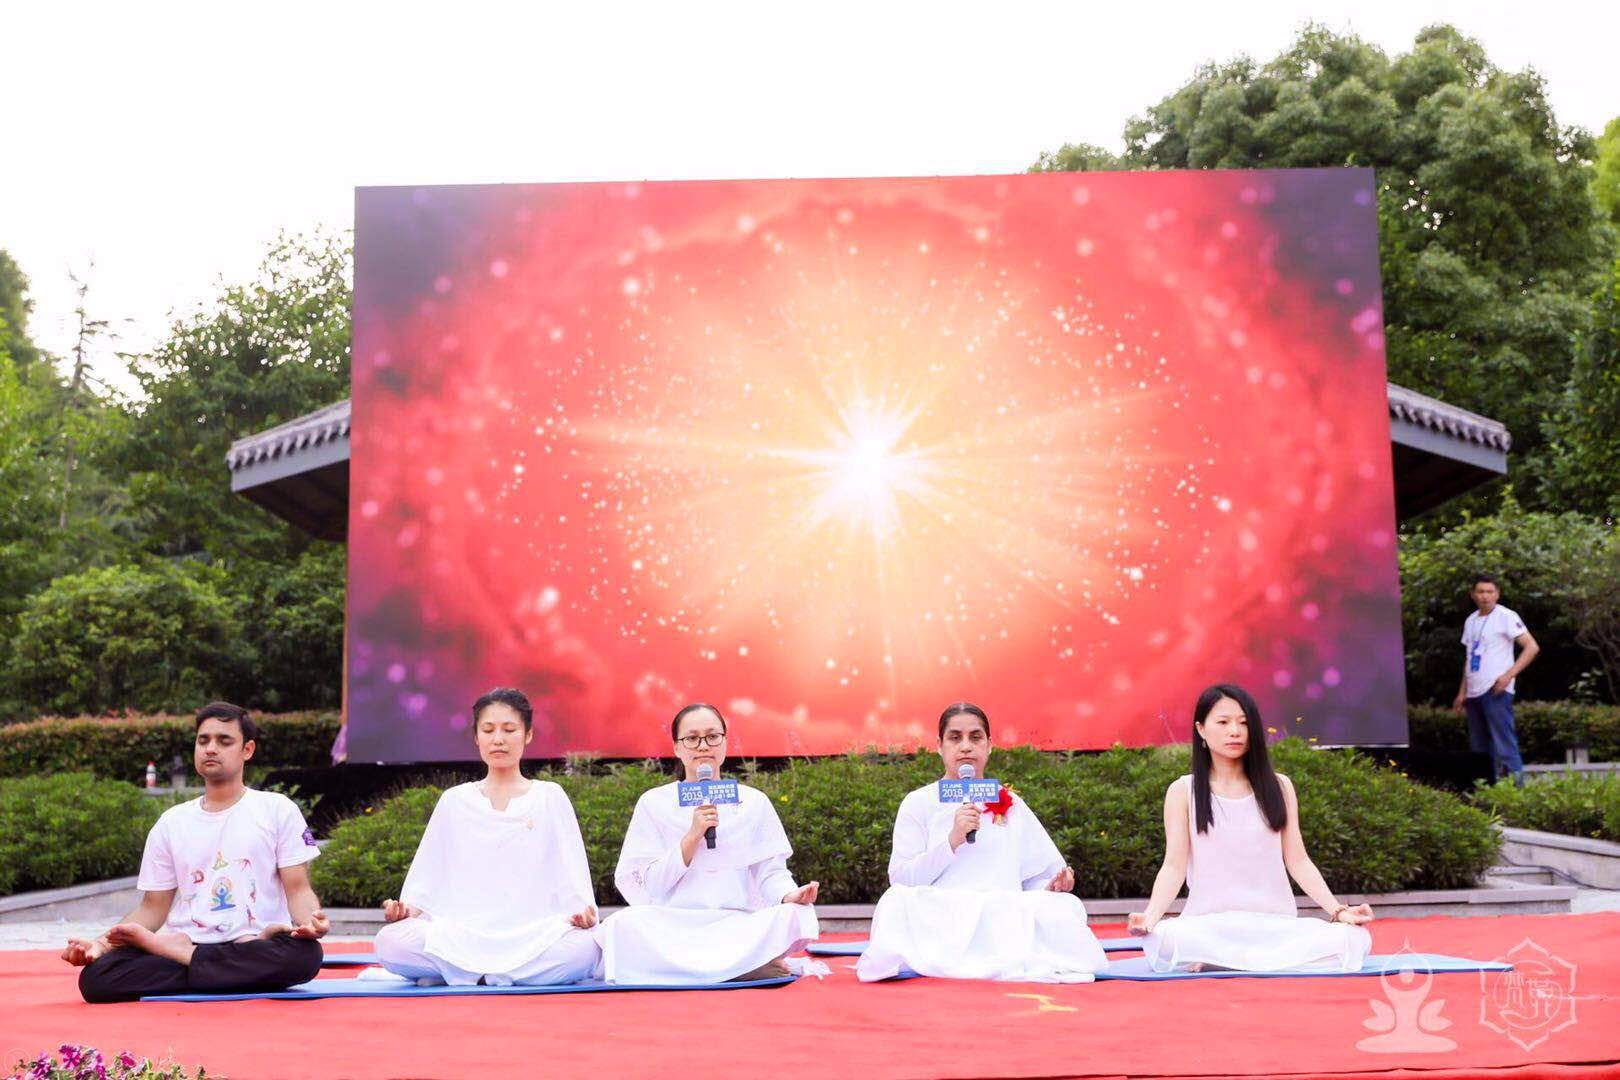 Stage,Sky,Pink,Display device,Technology,Electronic device,Spring,Theatrical scenery,Leisure,Meditation